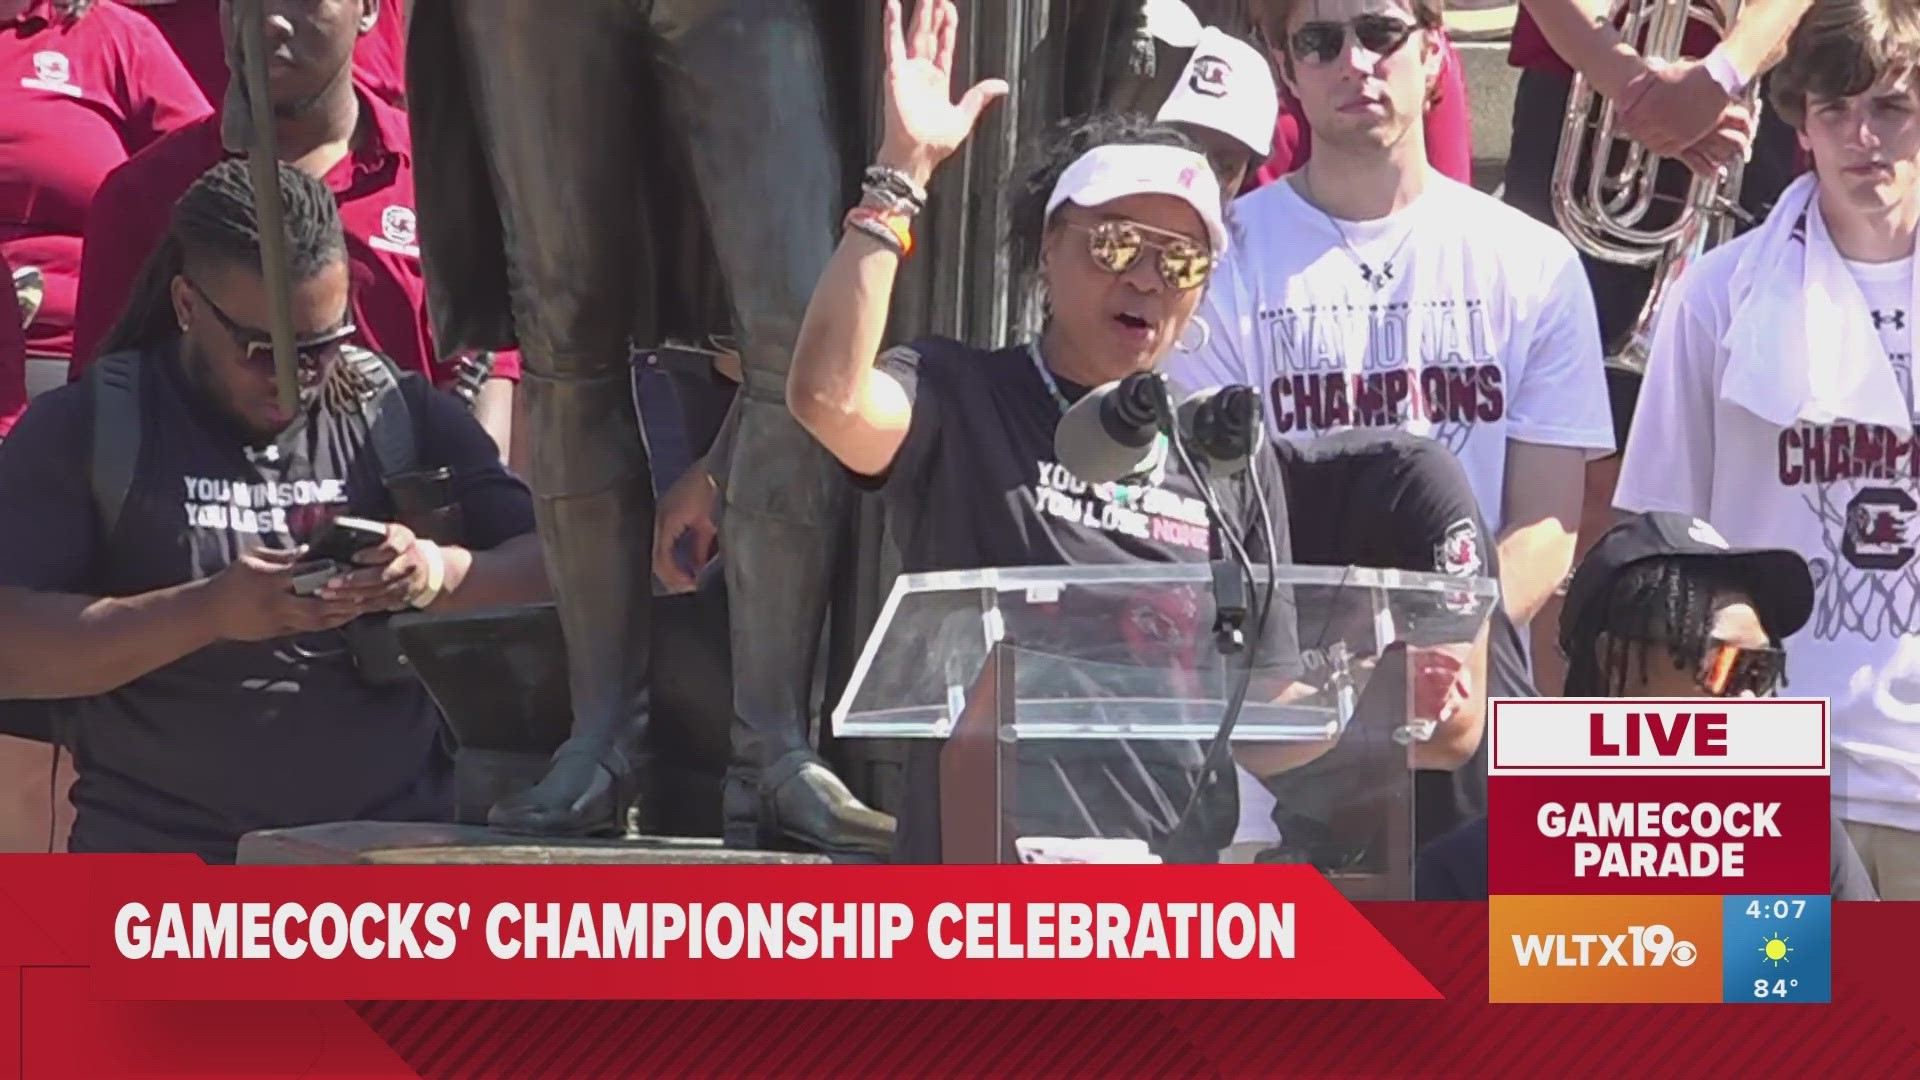 Watch all of South Carolina Head Coach Dawn Staley's comments at the Gamecocks victory parade.